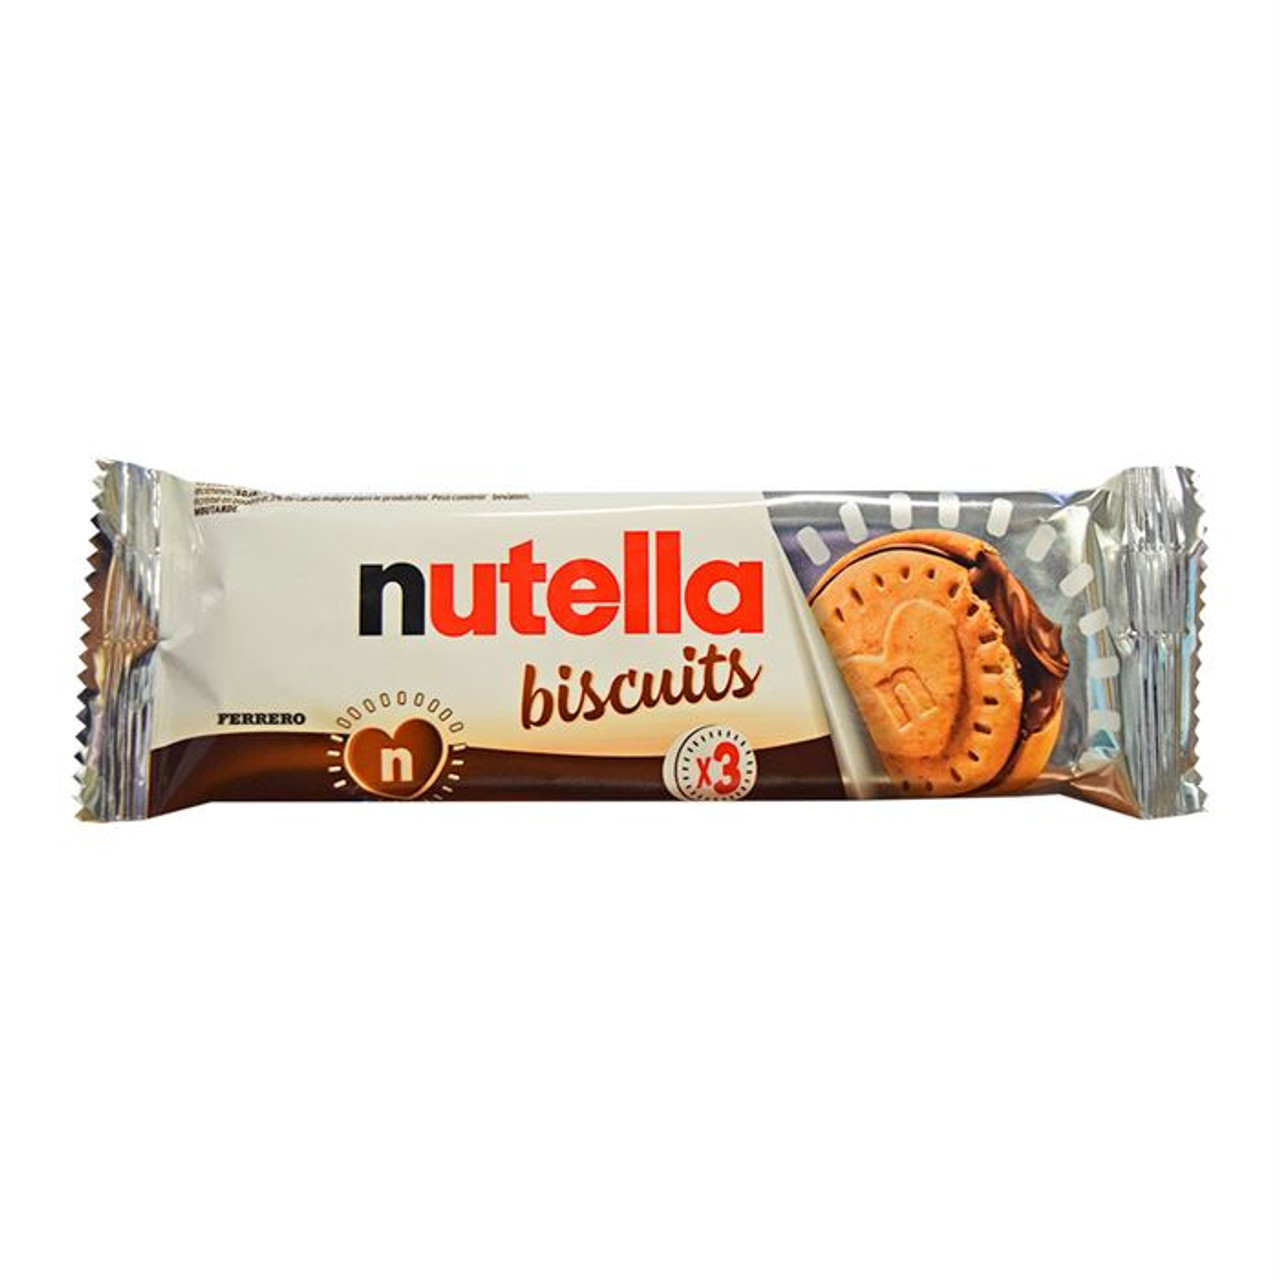 https://cdn11.bigcommerce.com/s-oxoxmgwste/images/stencil/1280x1280/products/4461/11466/nutella-biscuits-round-3-pack-41.4-g__90227.1702587450.jpg?c=1